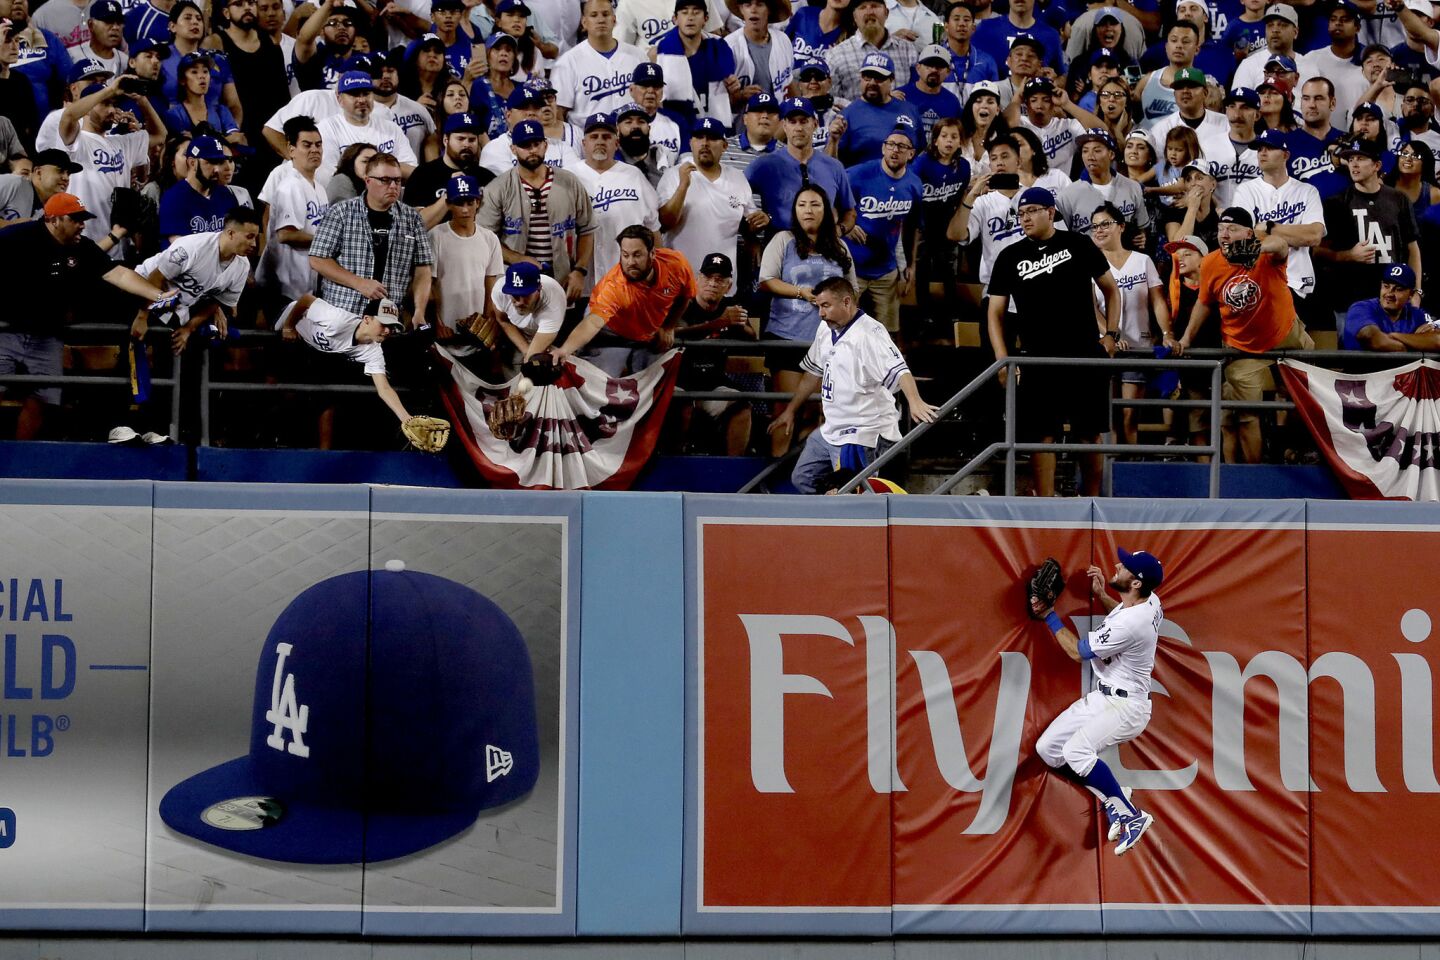 Chris Taylor can't get to a home run by Houston's Marwin Gonzalez during the ninth inning of Game 2.